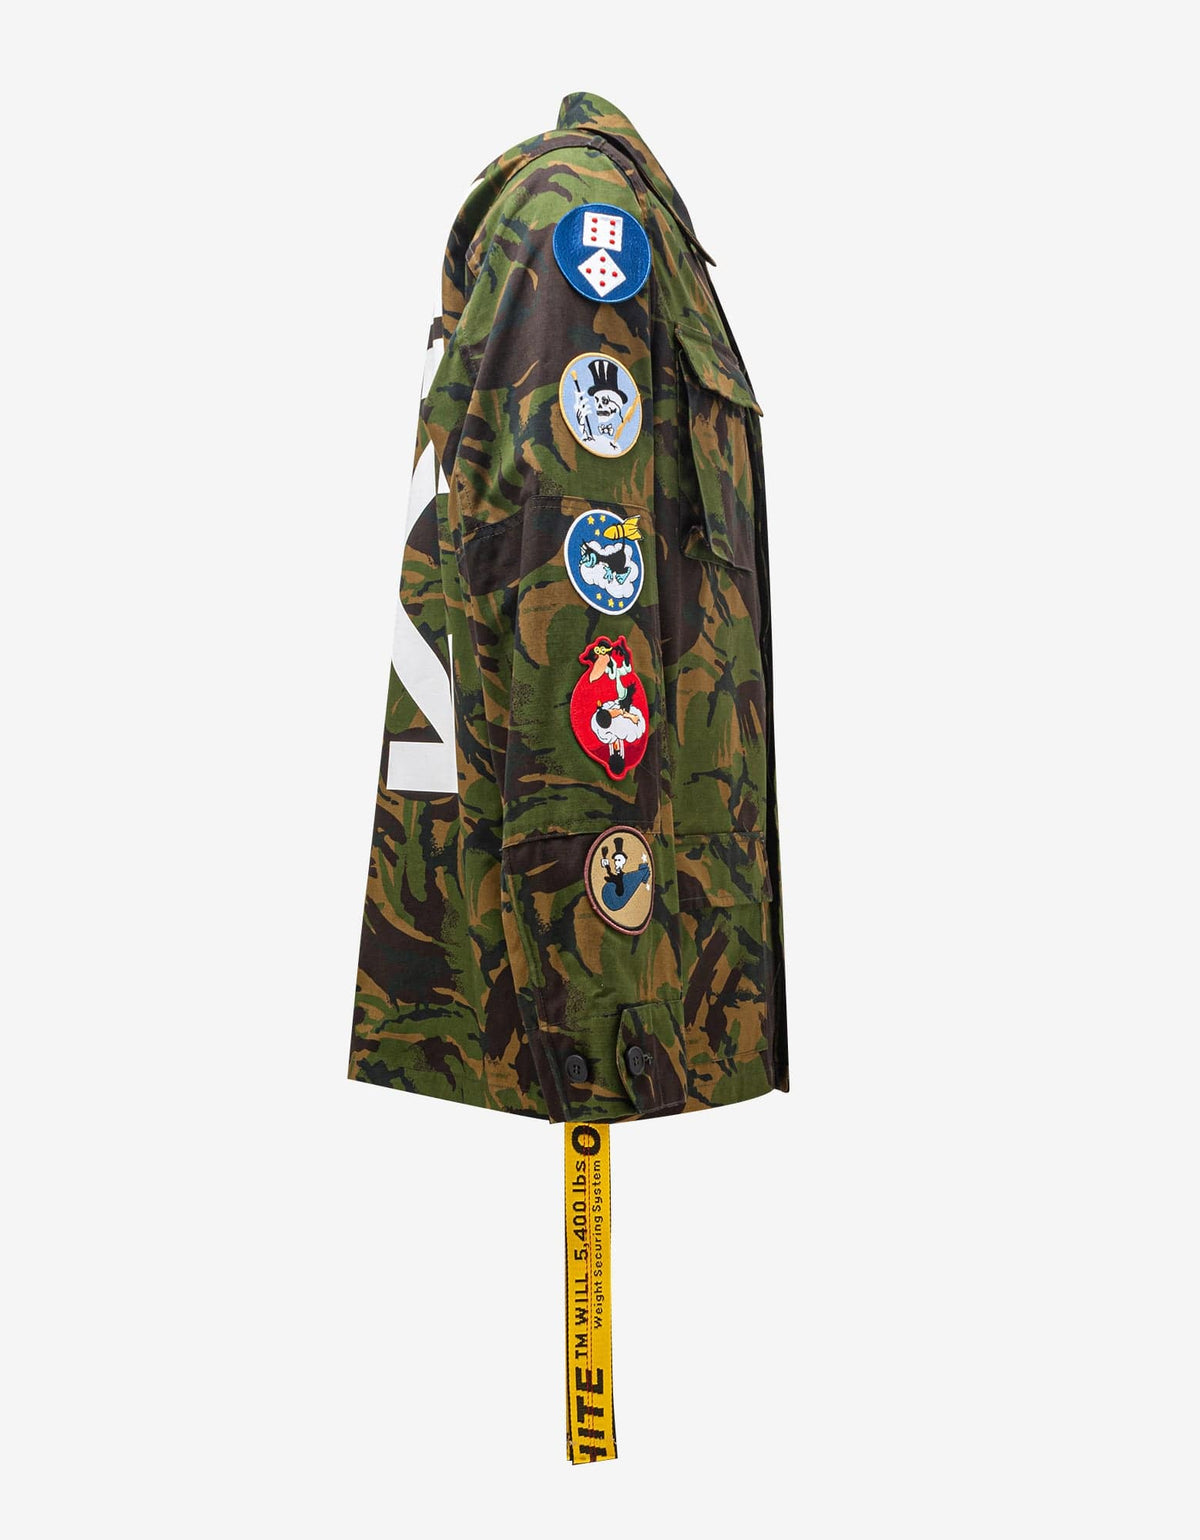 Off-White c/o Virgil Abloh Green Camouflage Patch Field Jacket